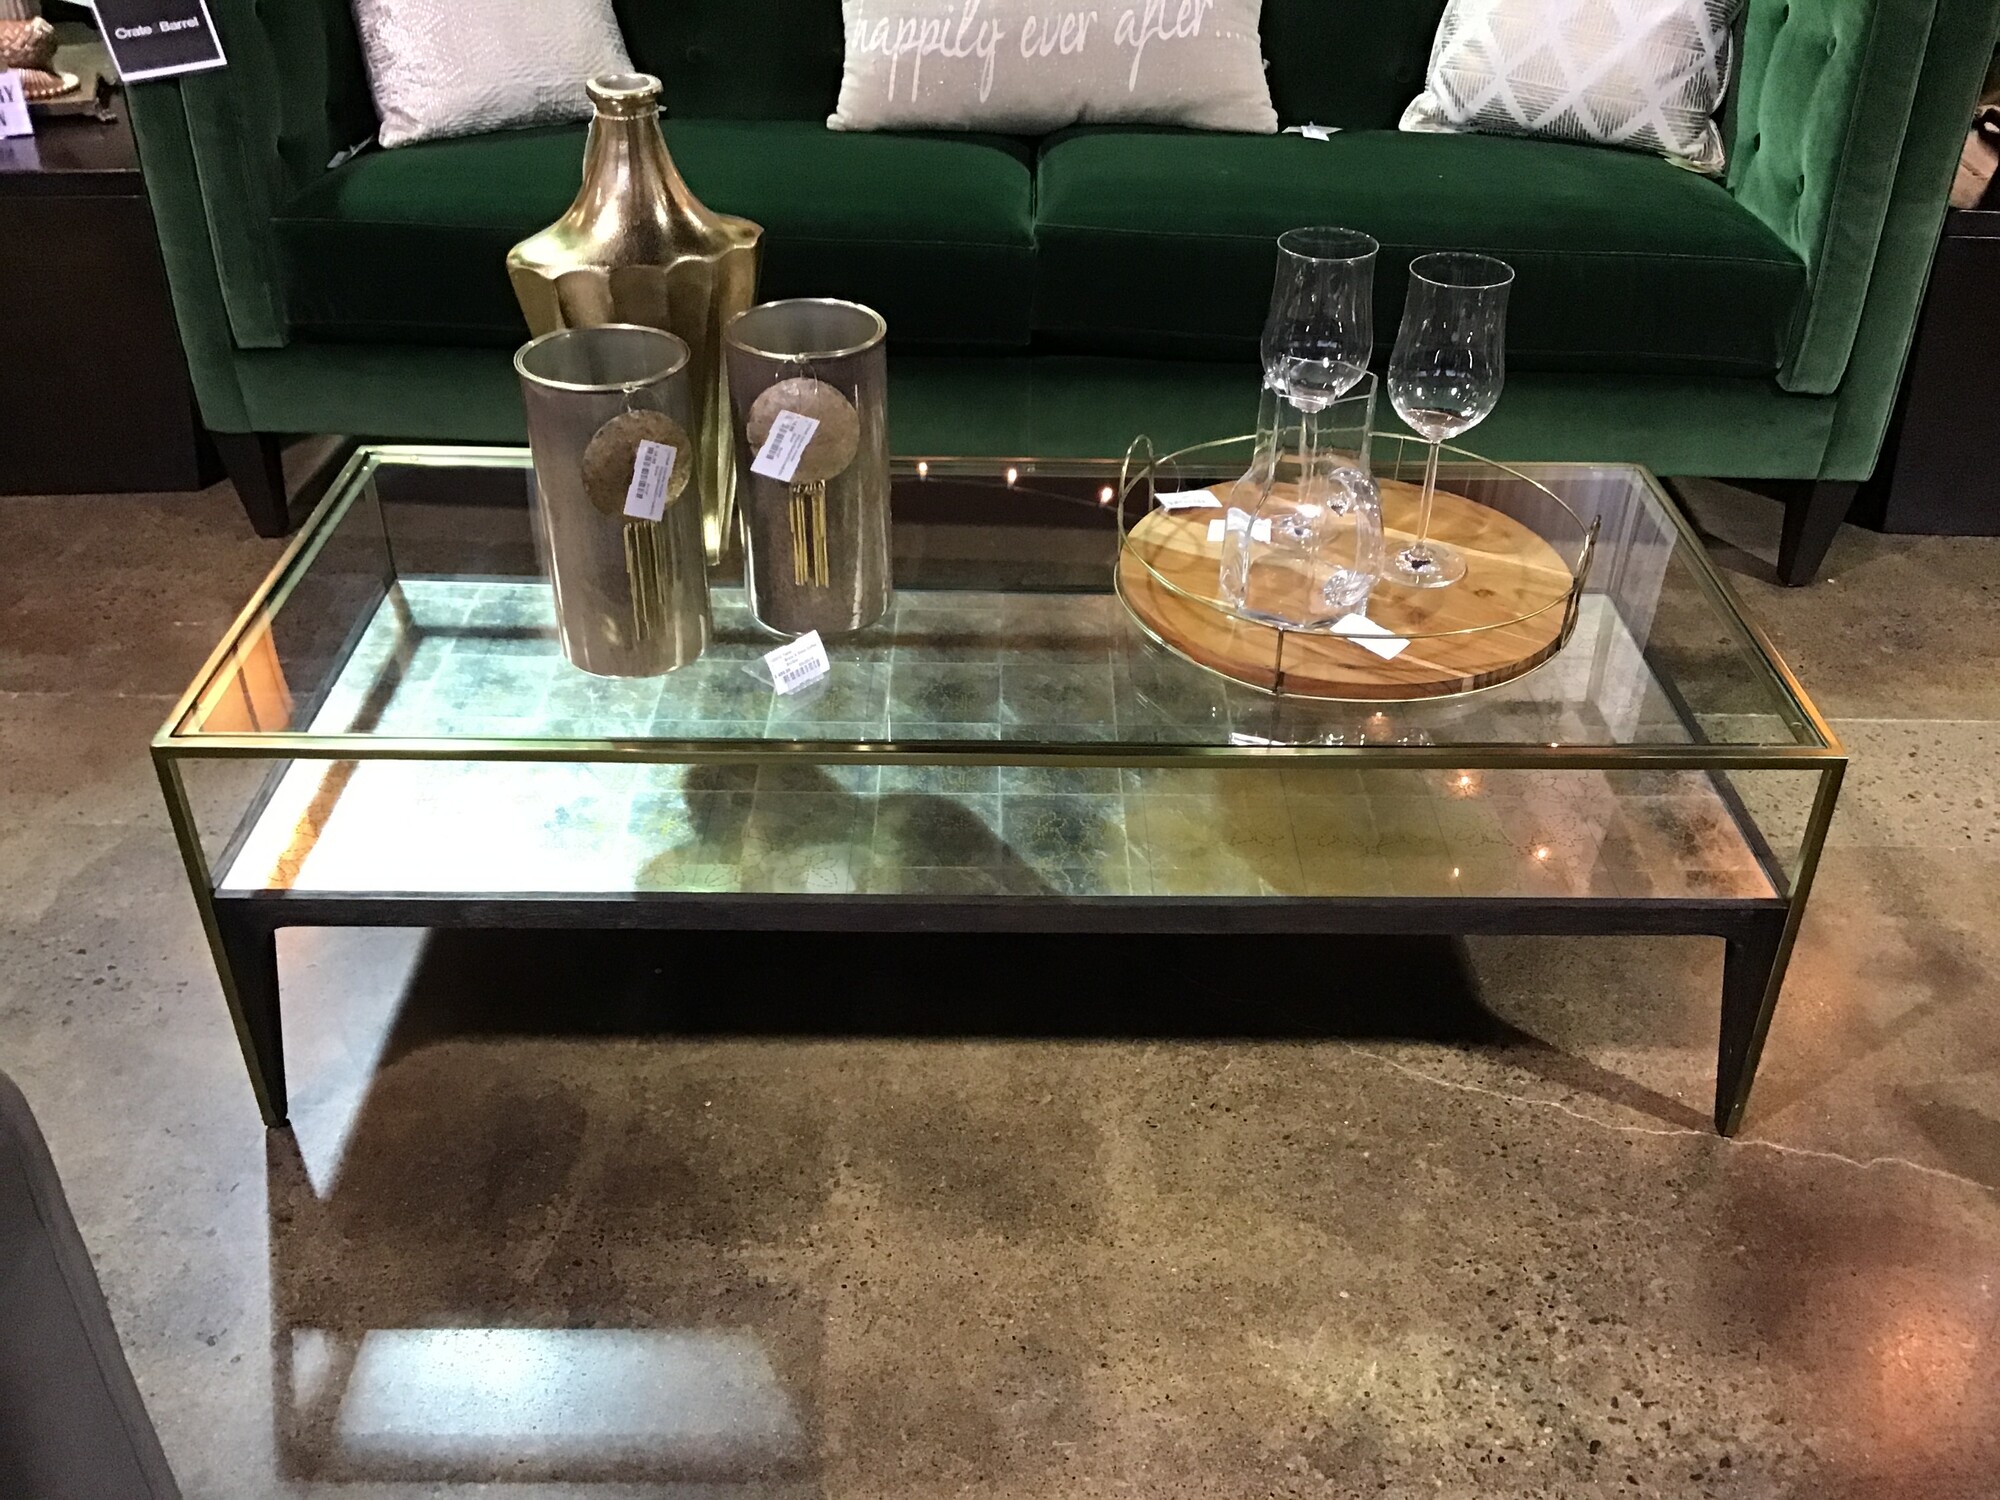 This coffee table is super on-trend! It features a brass (gold) frame and silver/gold detailing on the shelf under the glass. There is even some dark brown detailing to bring warmth to the piece! Love this table in front of our emerald green sofa!
Dimensions are 51-1/2 in x 21-1/2 in x 16 in